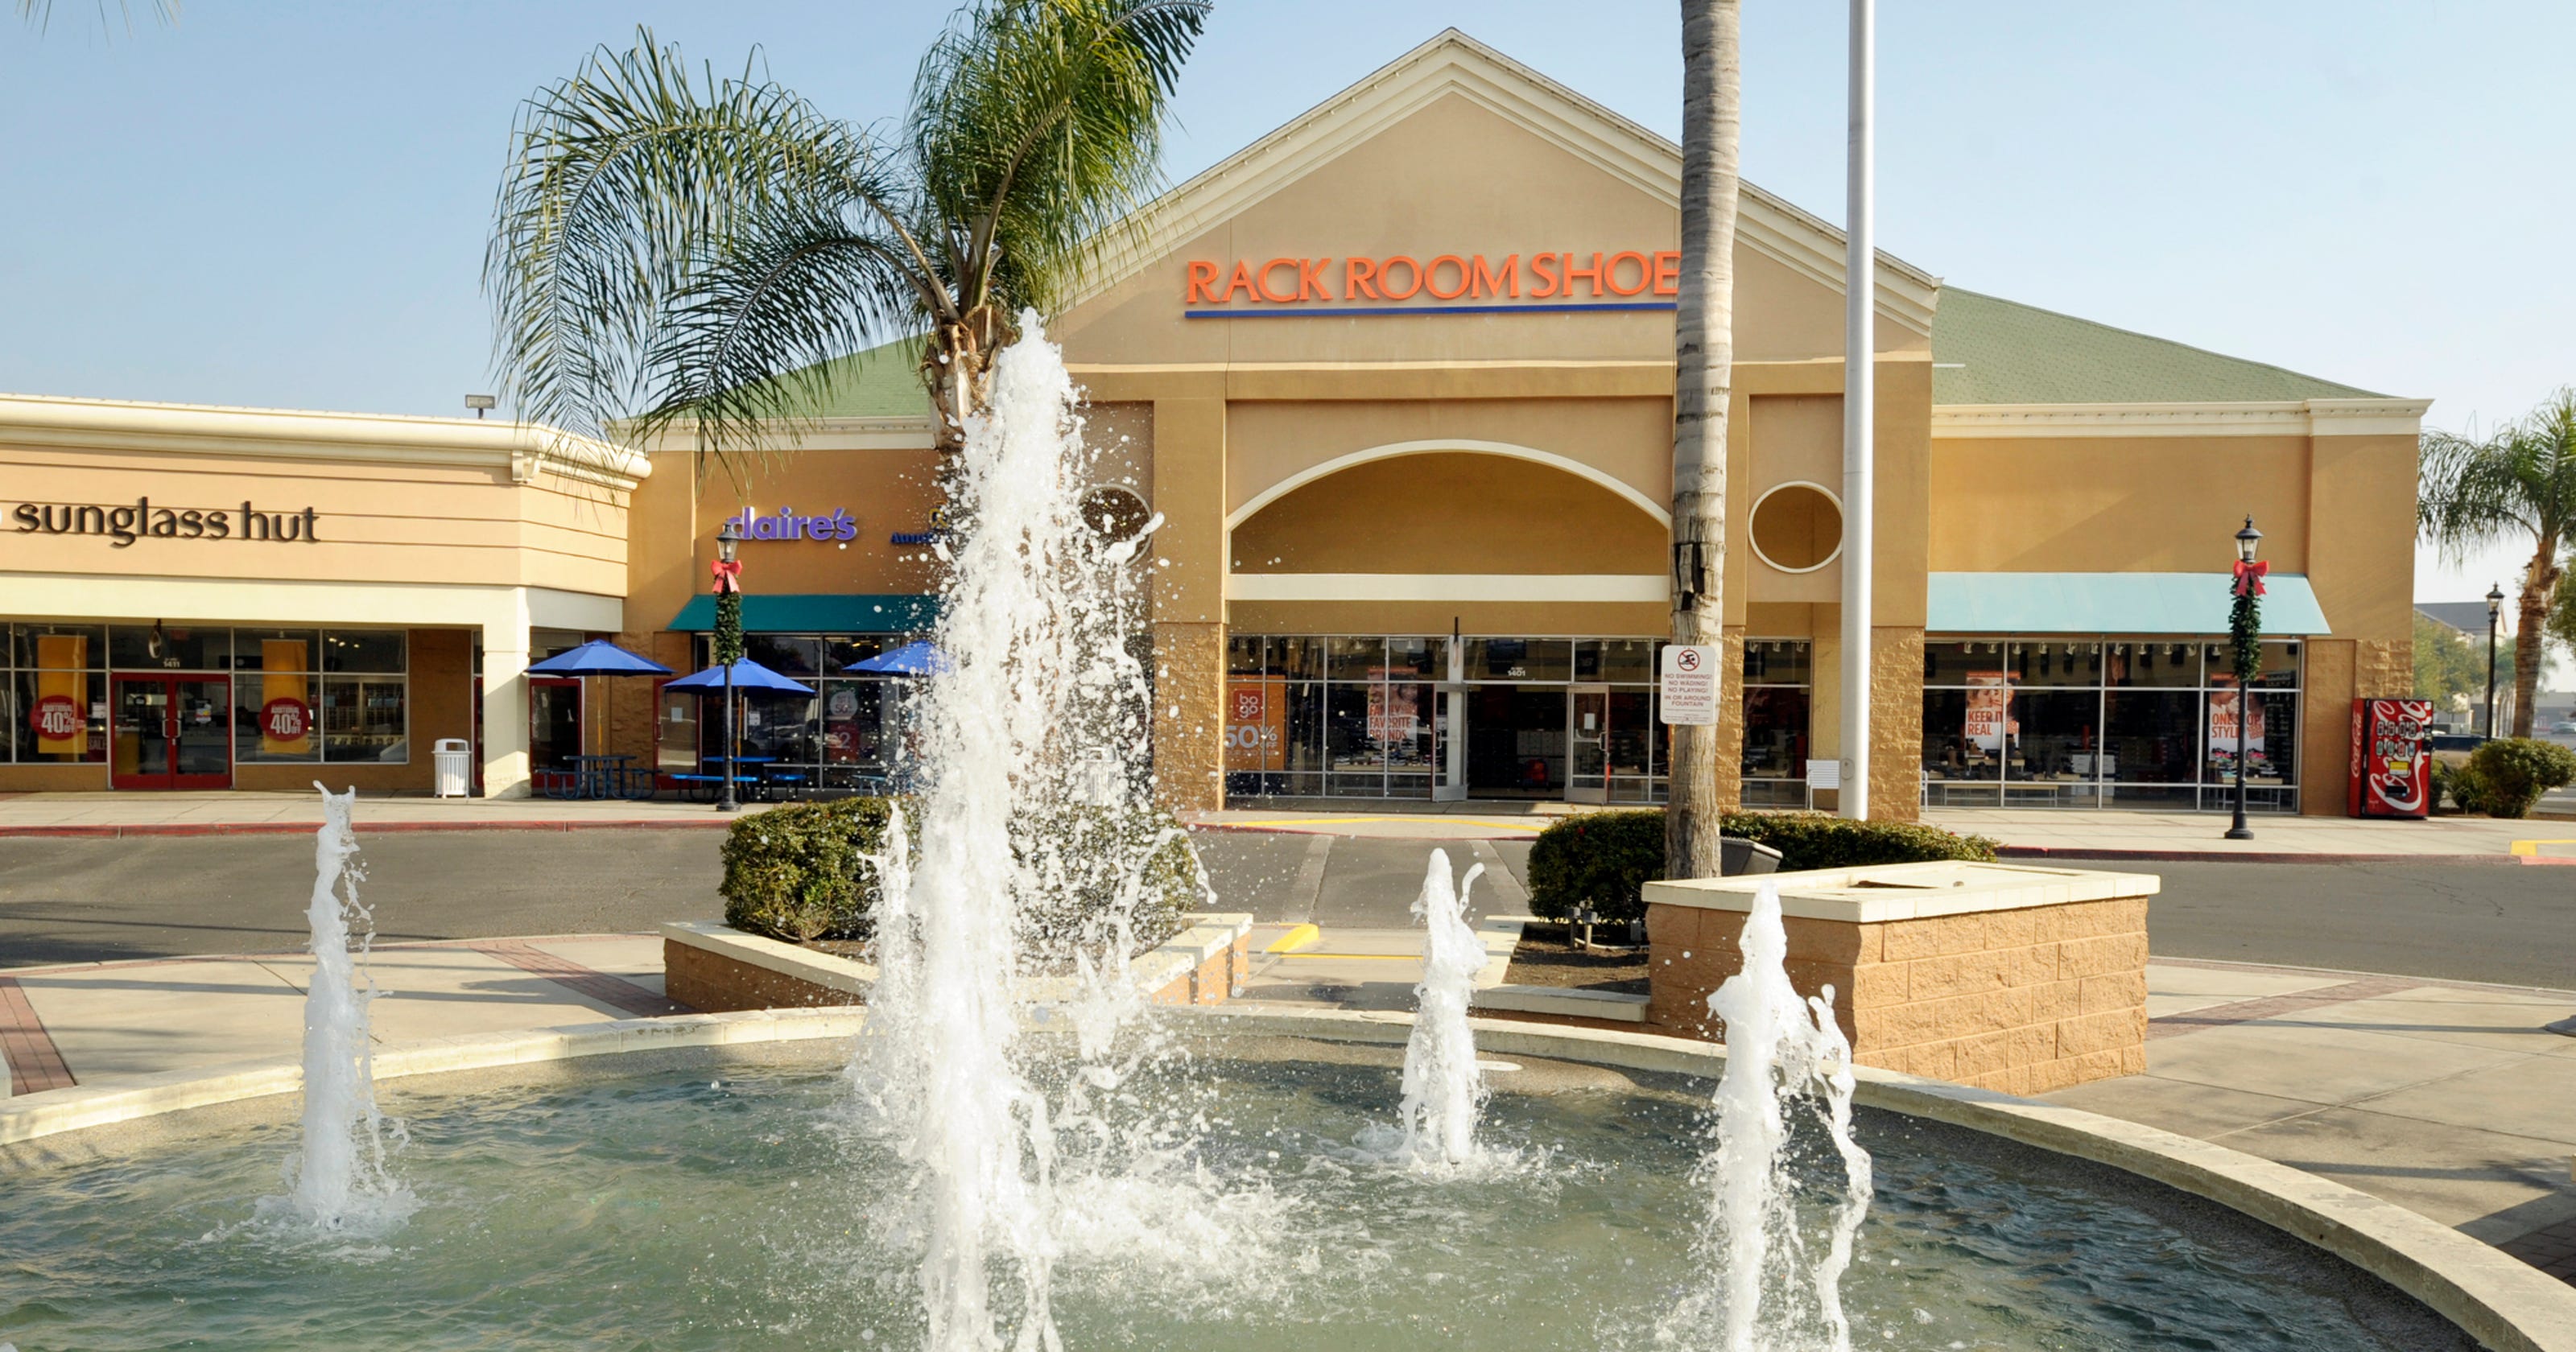 All Tulare Outlet stores open Easter Sunday